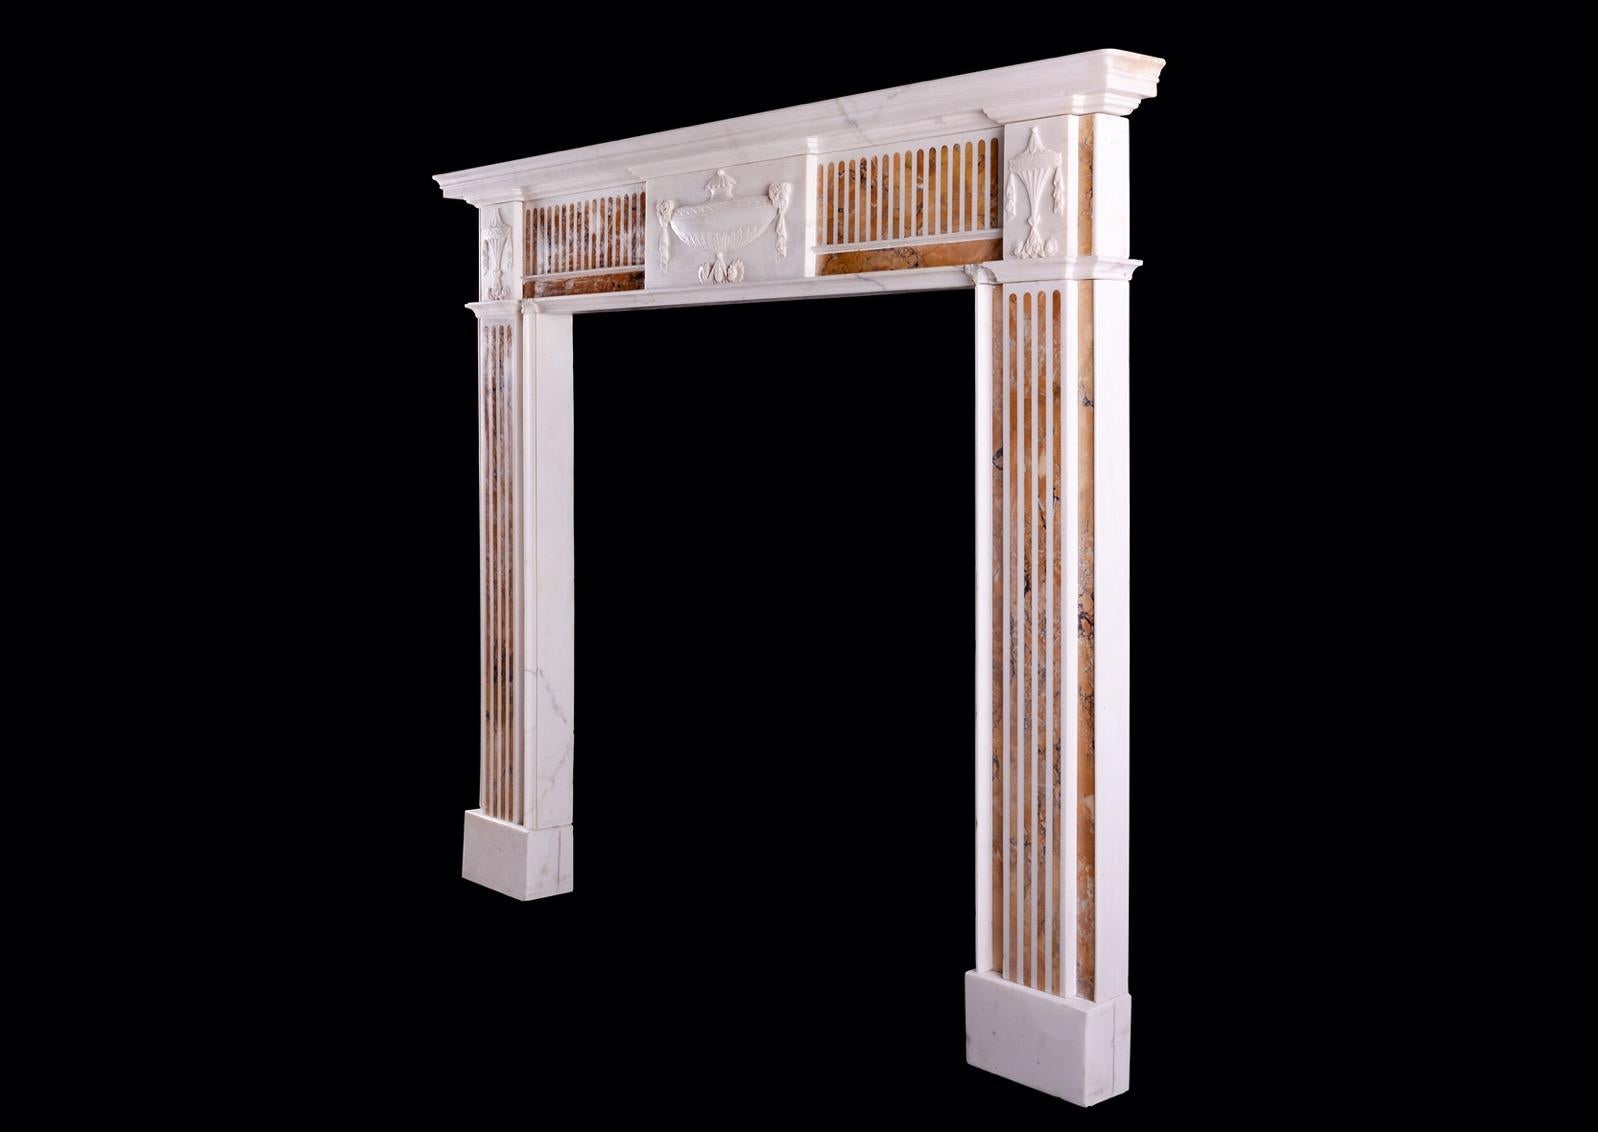 European An English Statuary Fireplace with Italian Siena Marble Inlay For Sale